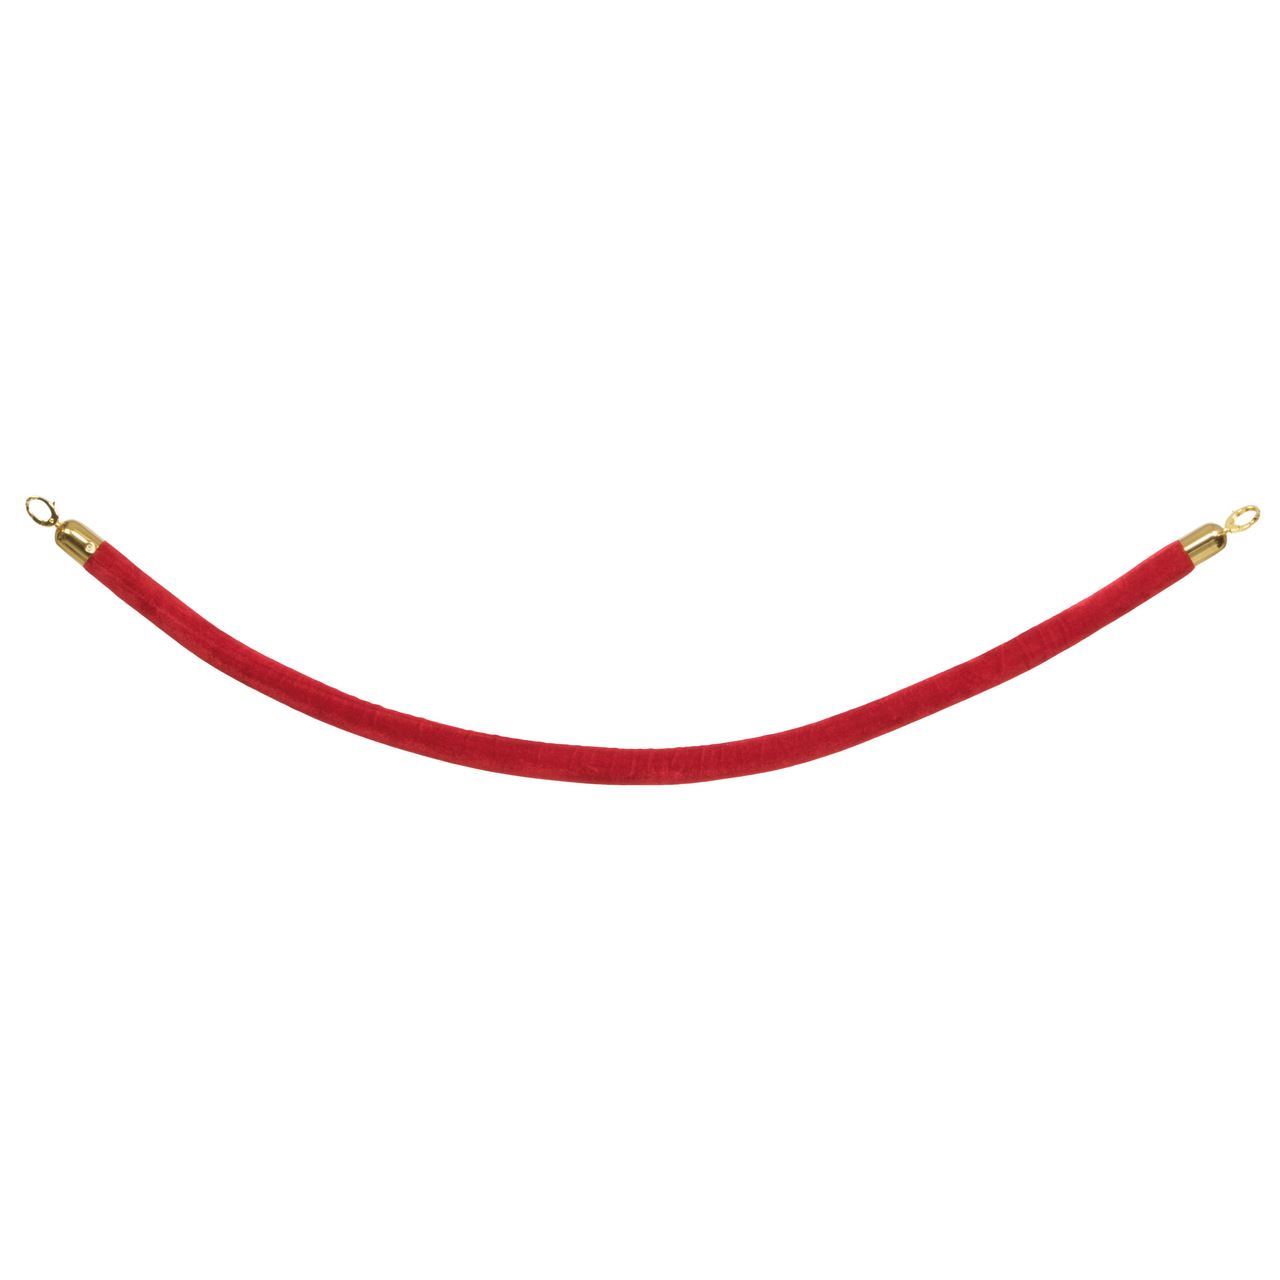 Cordon rouge embouts or 1.5 m Securit